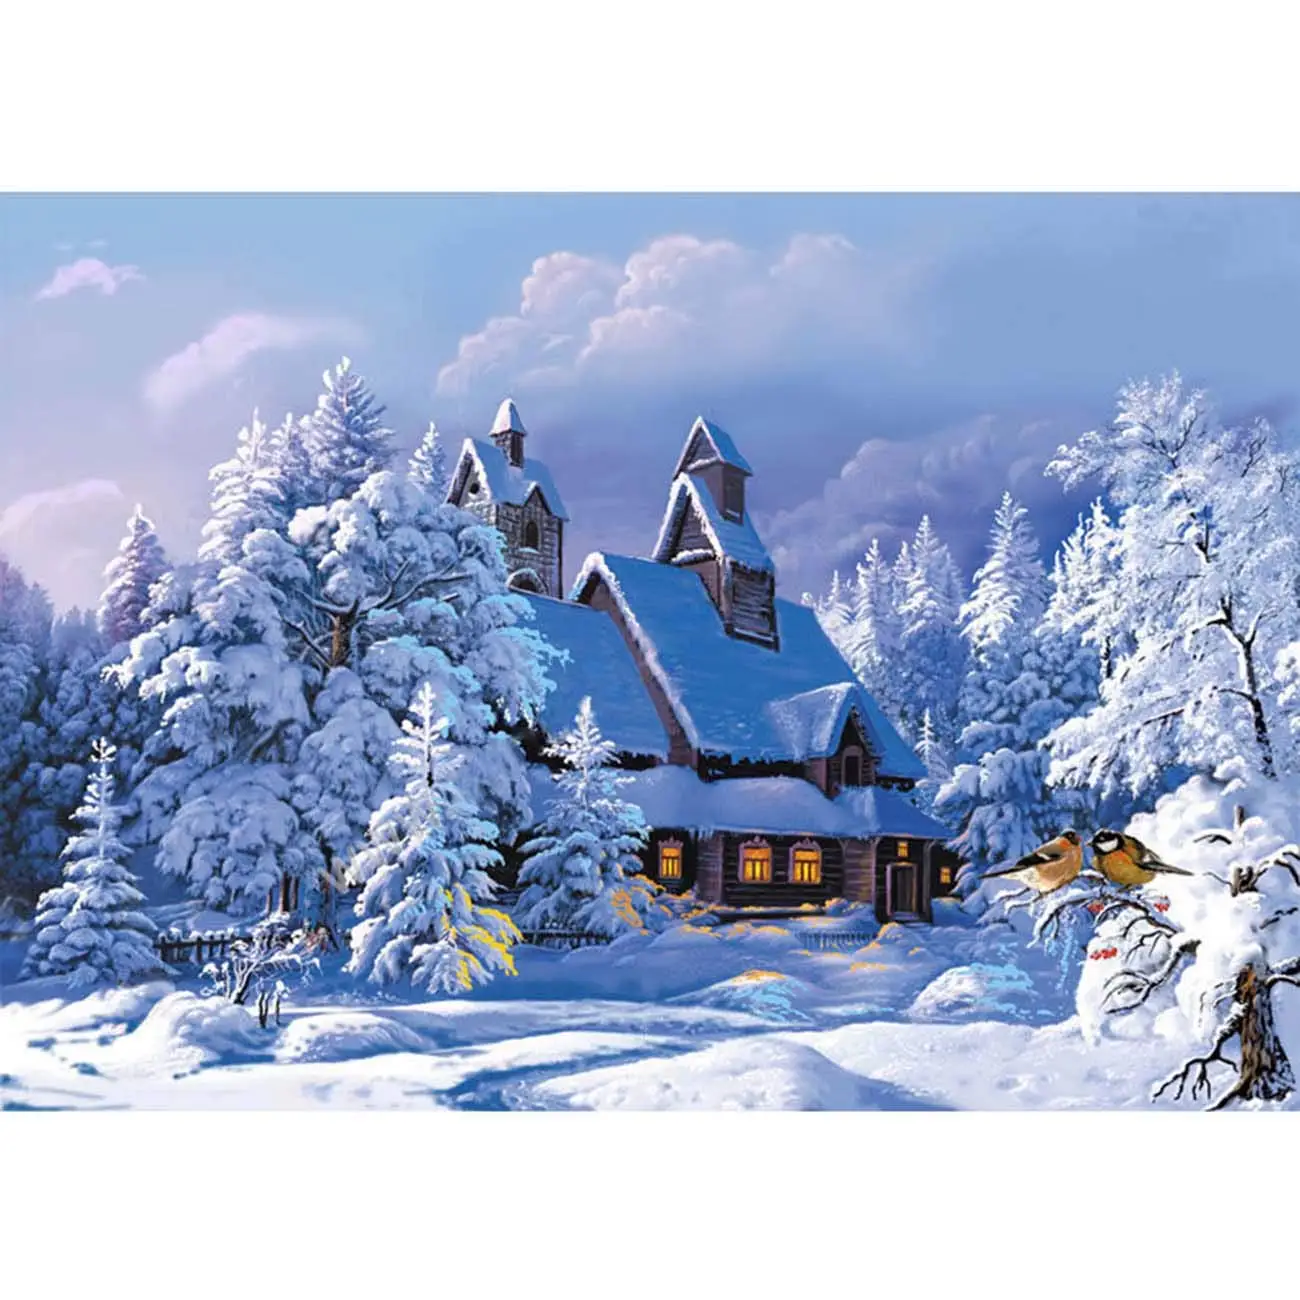 

5D Diamond Painting Snow Woods Cottage in Winter Full Drill by Number Kits for Adults, DIY Diamond Set Arts Craft a0089